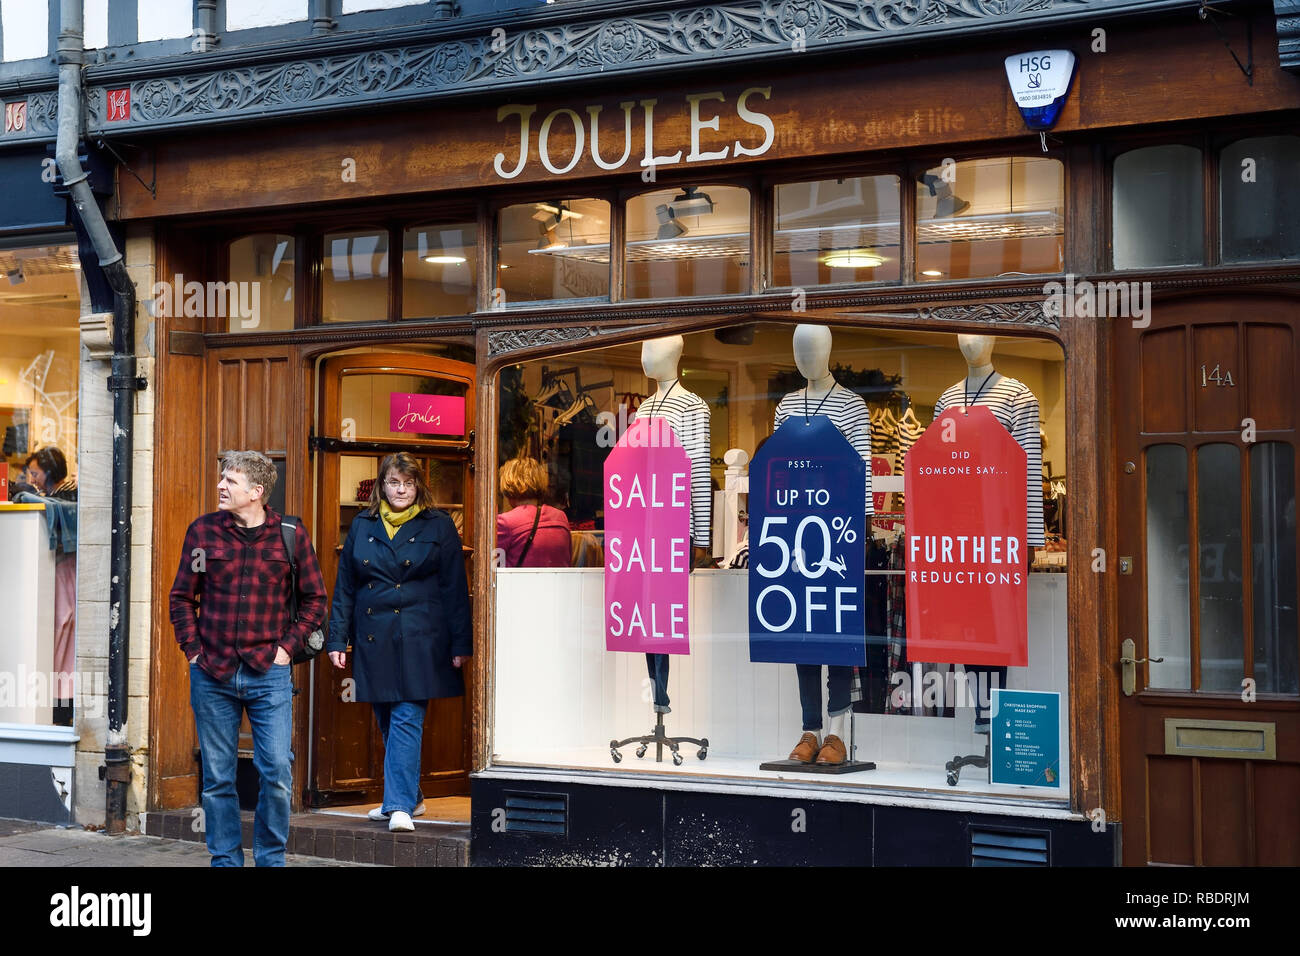 The Chester branch of Joules with sale signs in the window Stock Photo